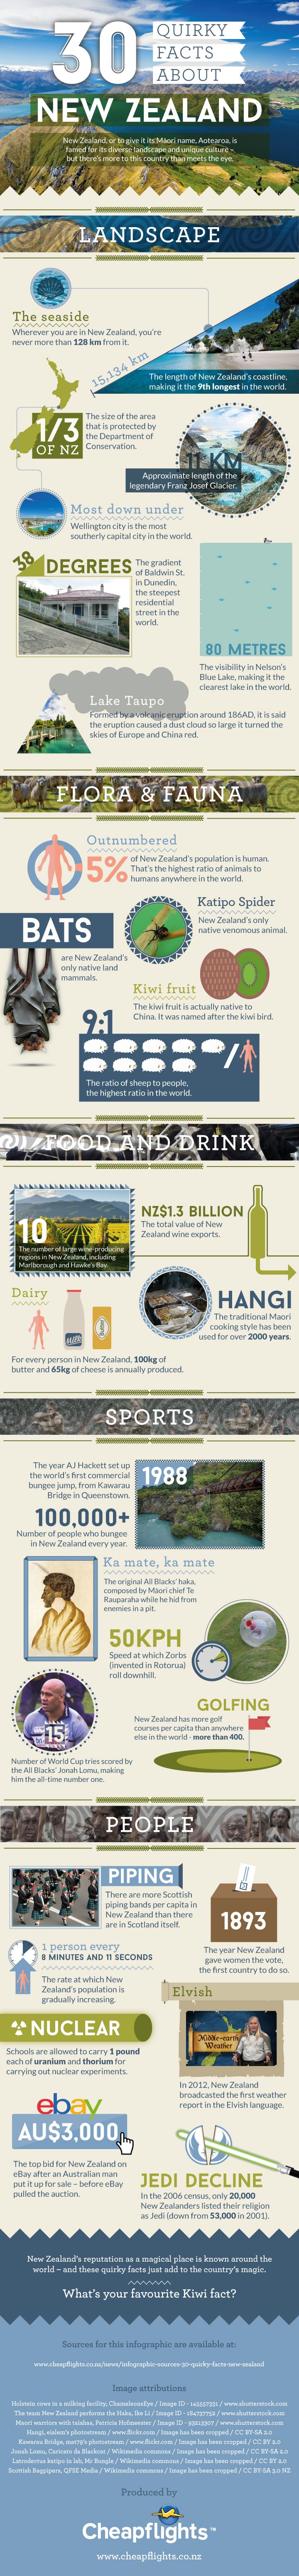 30 Quirky Facts About New Zealand InfoGraphic - The Fact Site